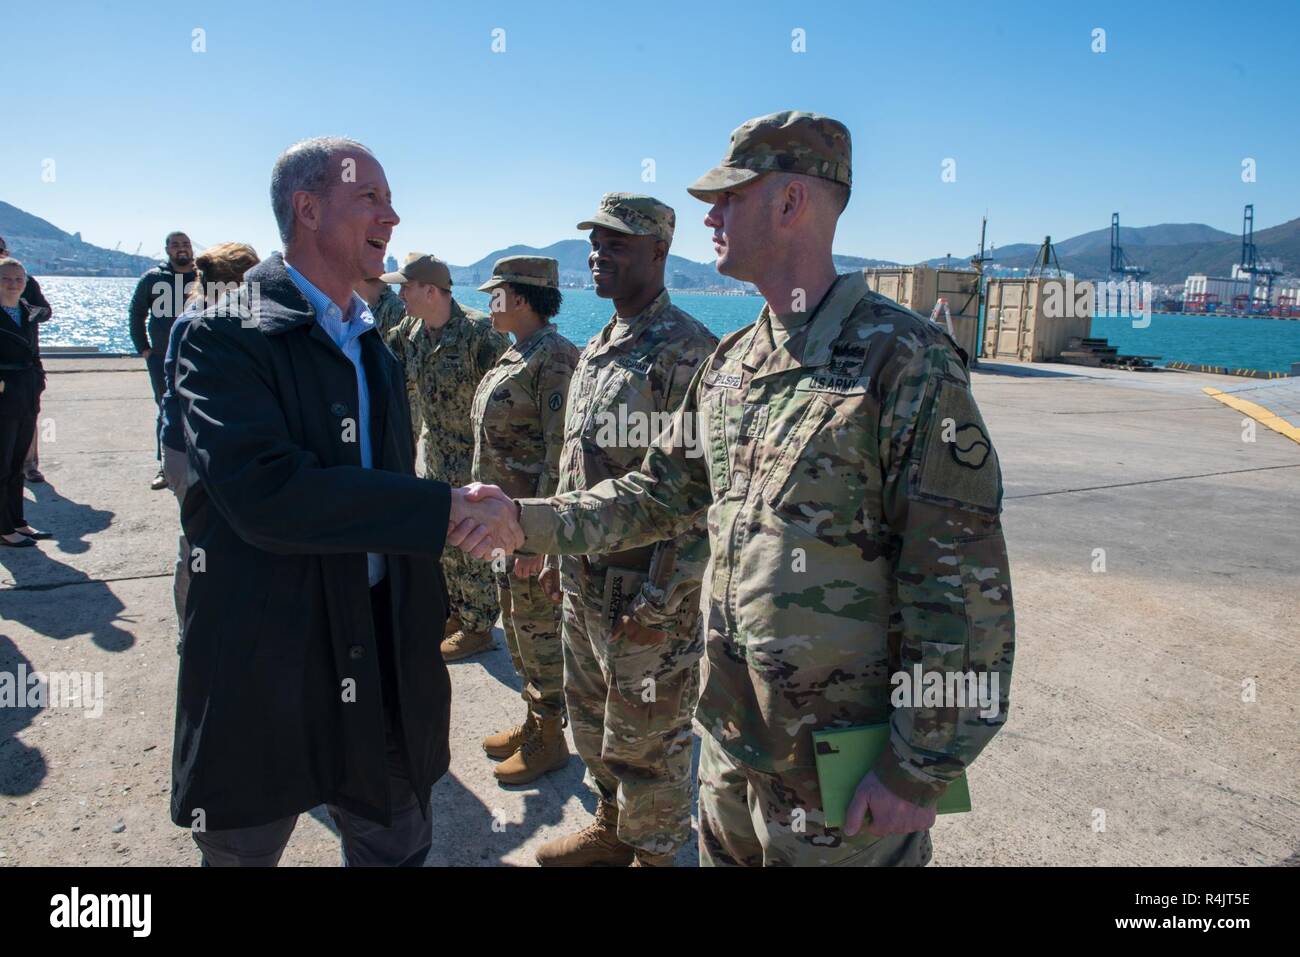 BUSAN, Republic of Korea (Oct. 30, 2018) U.S. Rep. William McClellan 'Mac' Thornberry, chairman of the House Armed Services Committee (HASC), meets with service members assigned to U.S. Forces Korea at Pier 8 in Busan. Thornberry's visit to Pier 8 is a part of an overall site visit to the Korean peninsula to interact with various U.S. military components and gain a better understanding of the U.S. and ROK alliance. Stock Photo